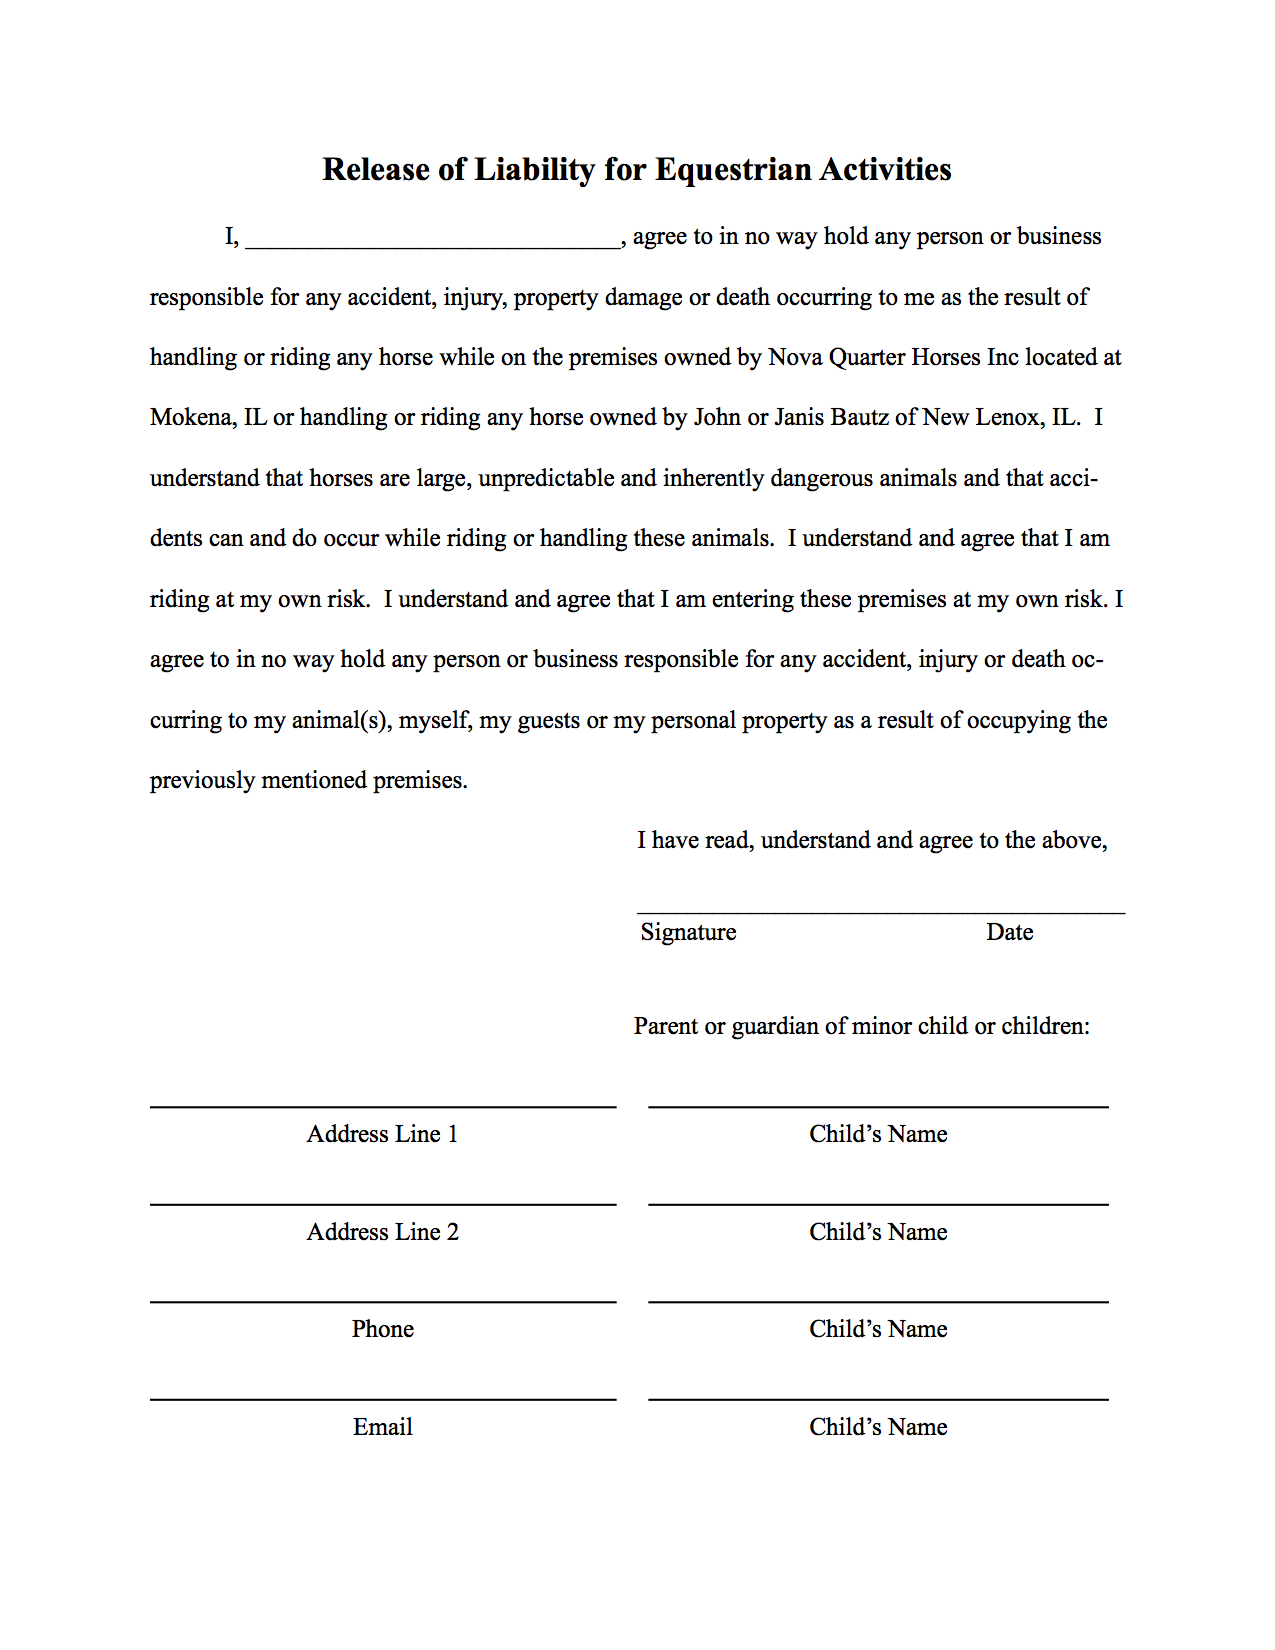 Liability Release Waiver Form Free Printable Documents 9415